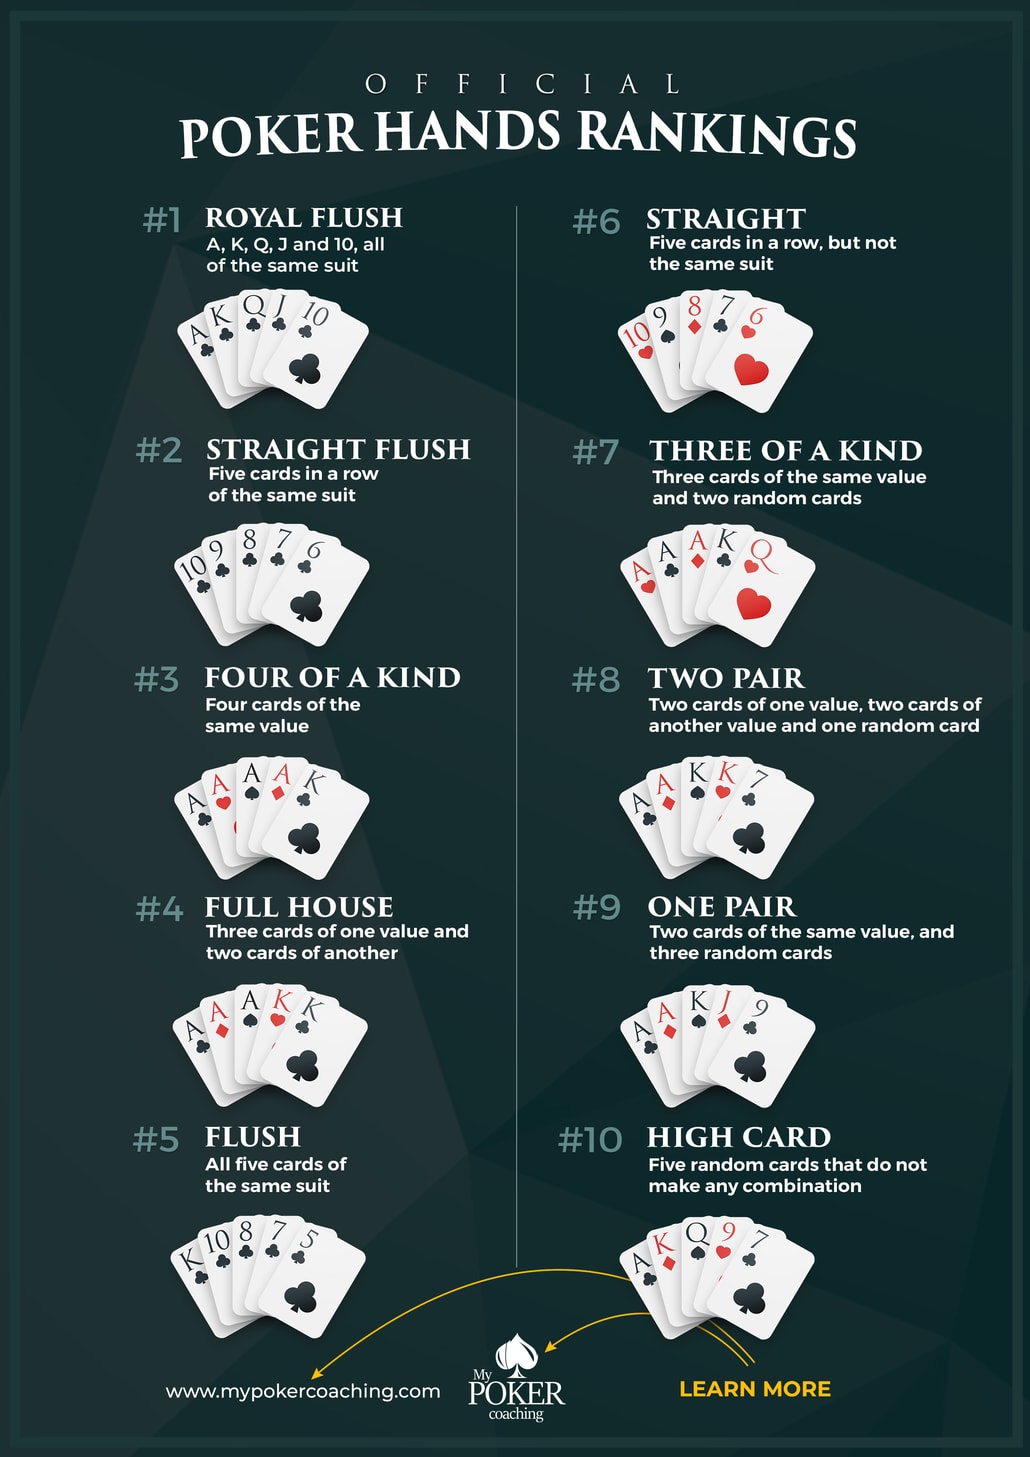 Poker Gift Poker Deck of Cards Playing Cards That Show Your Odds ODDS on CARDS: Texas Holdem Edition Poker Cards Learn Probability While You Play Poker 